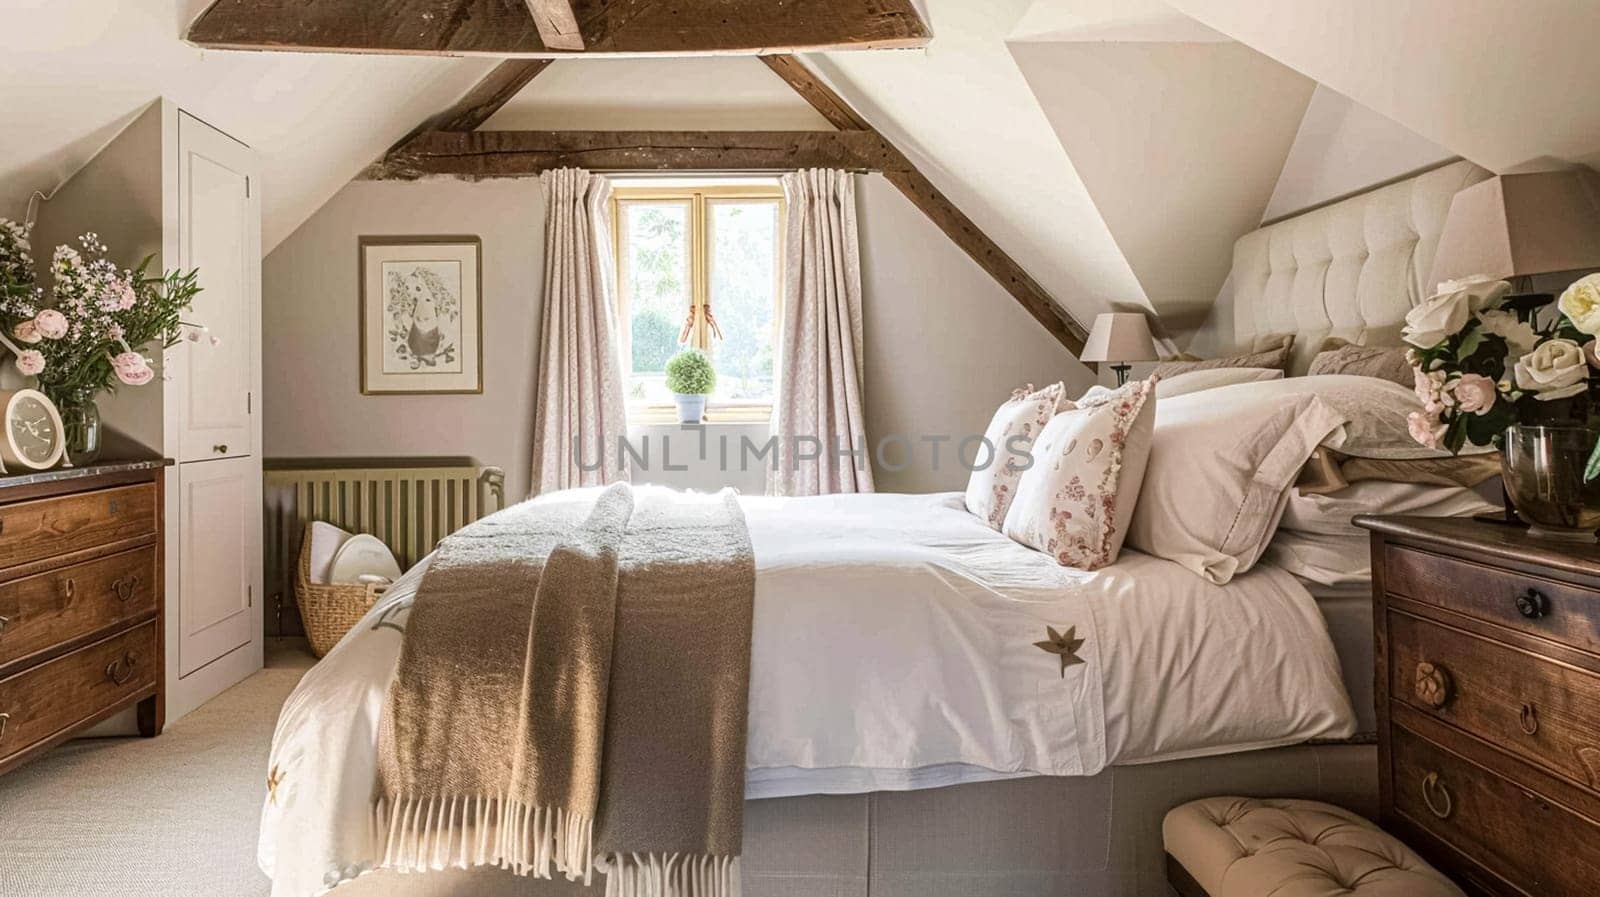 Cotswolds cottage style bedroom decor, interior design and home decor, bed with elegant bedding and bespoke furniture, English countryside house or holiday rental by Anneleven